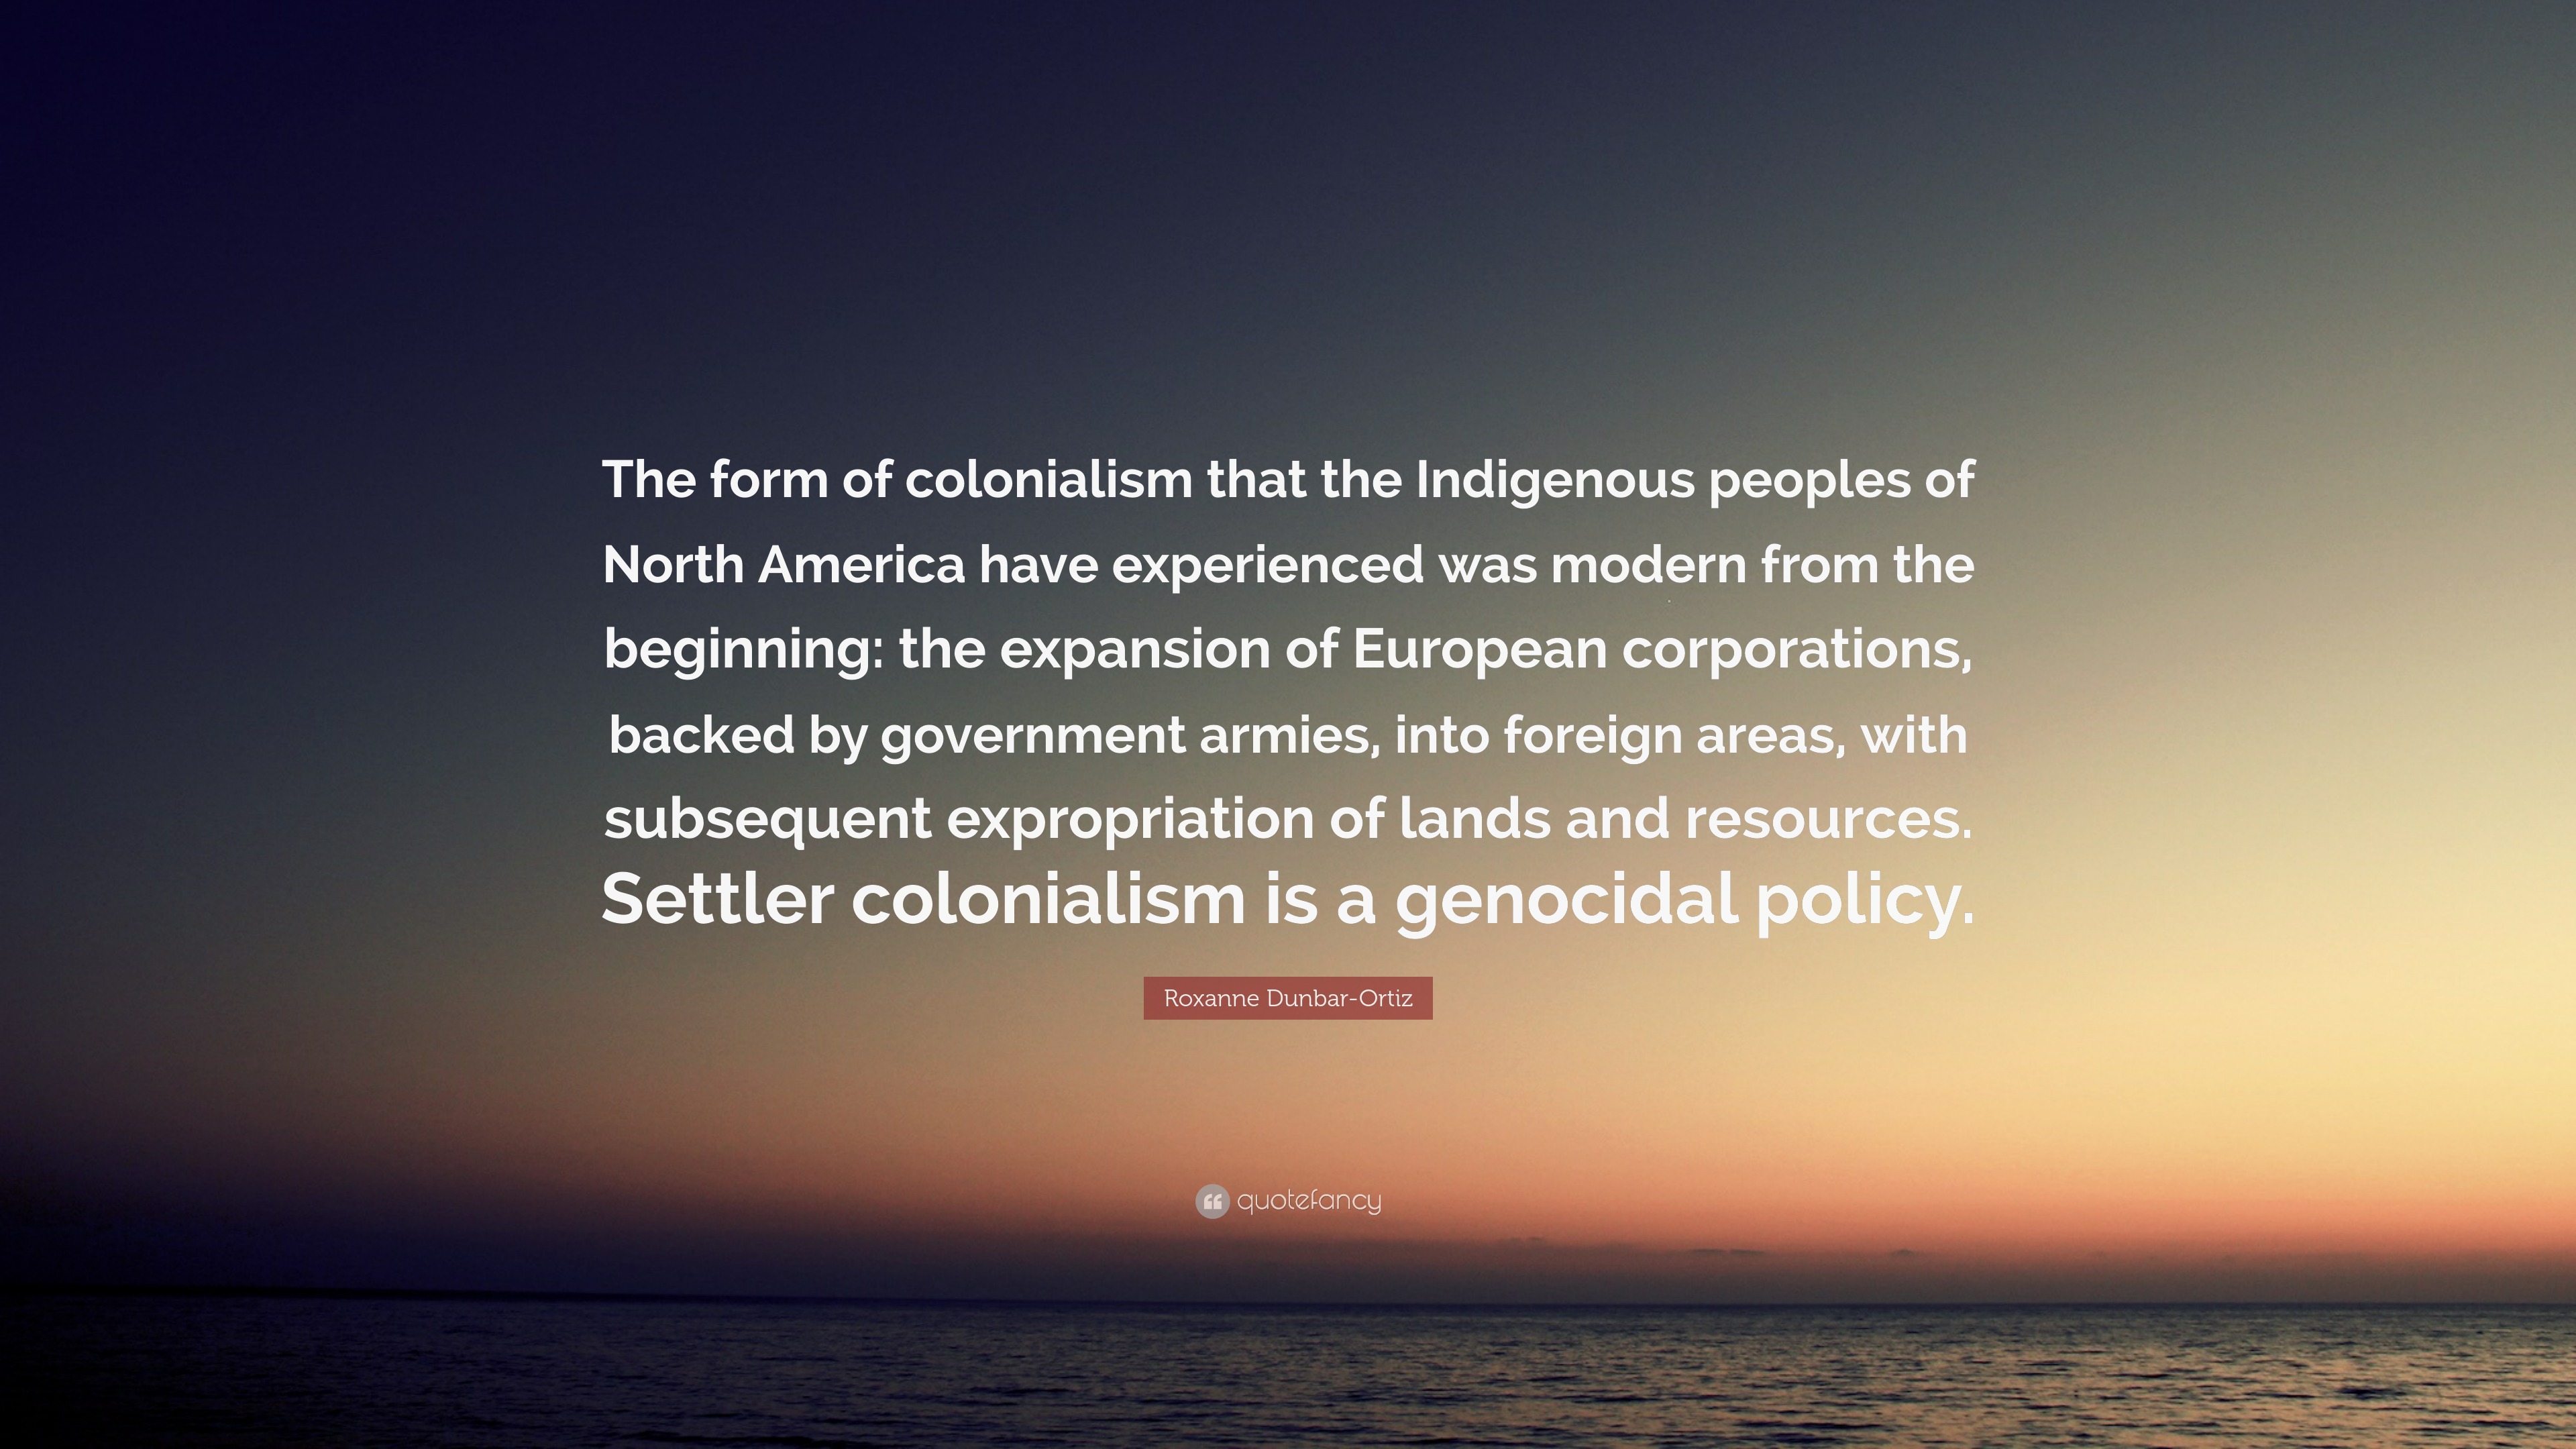 The new promised land: Settler-colonial roots of Obama's ideology